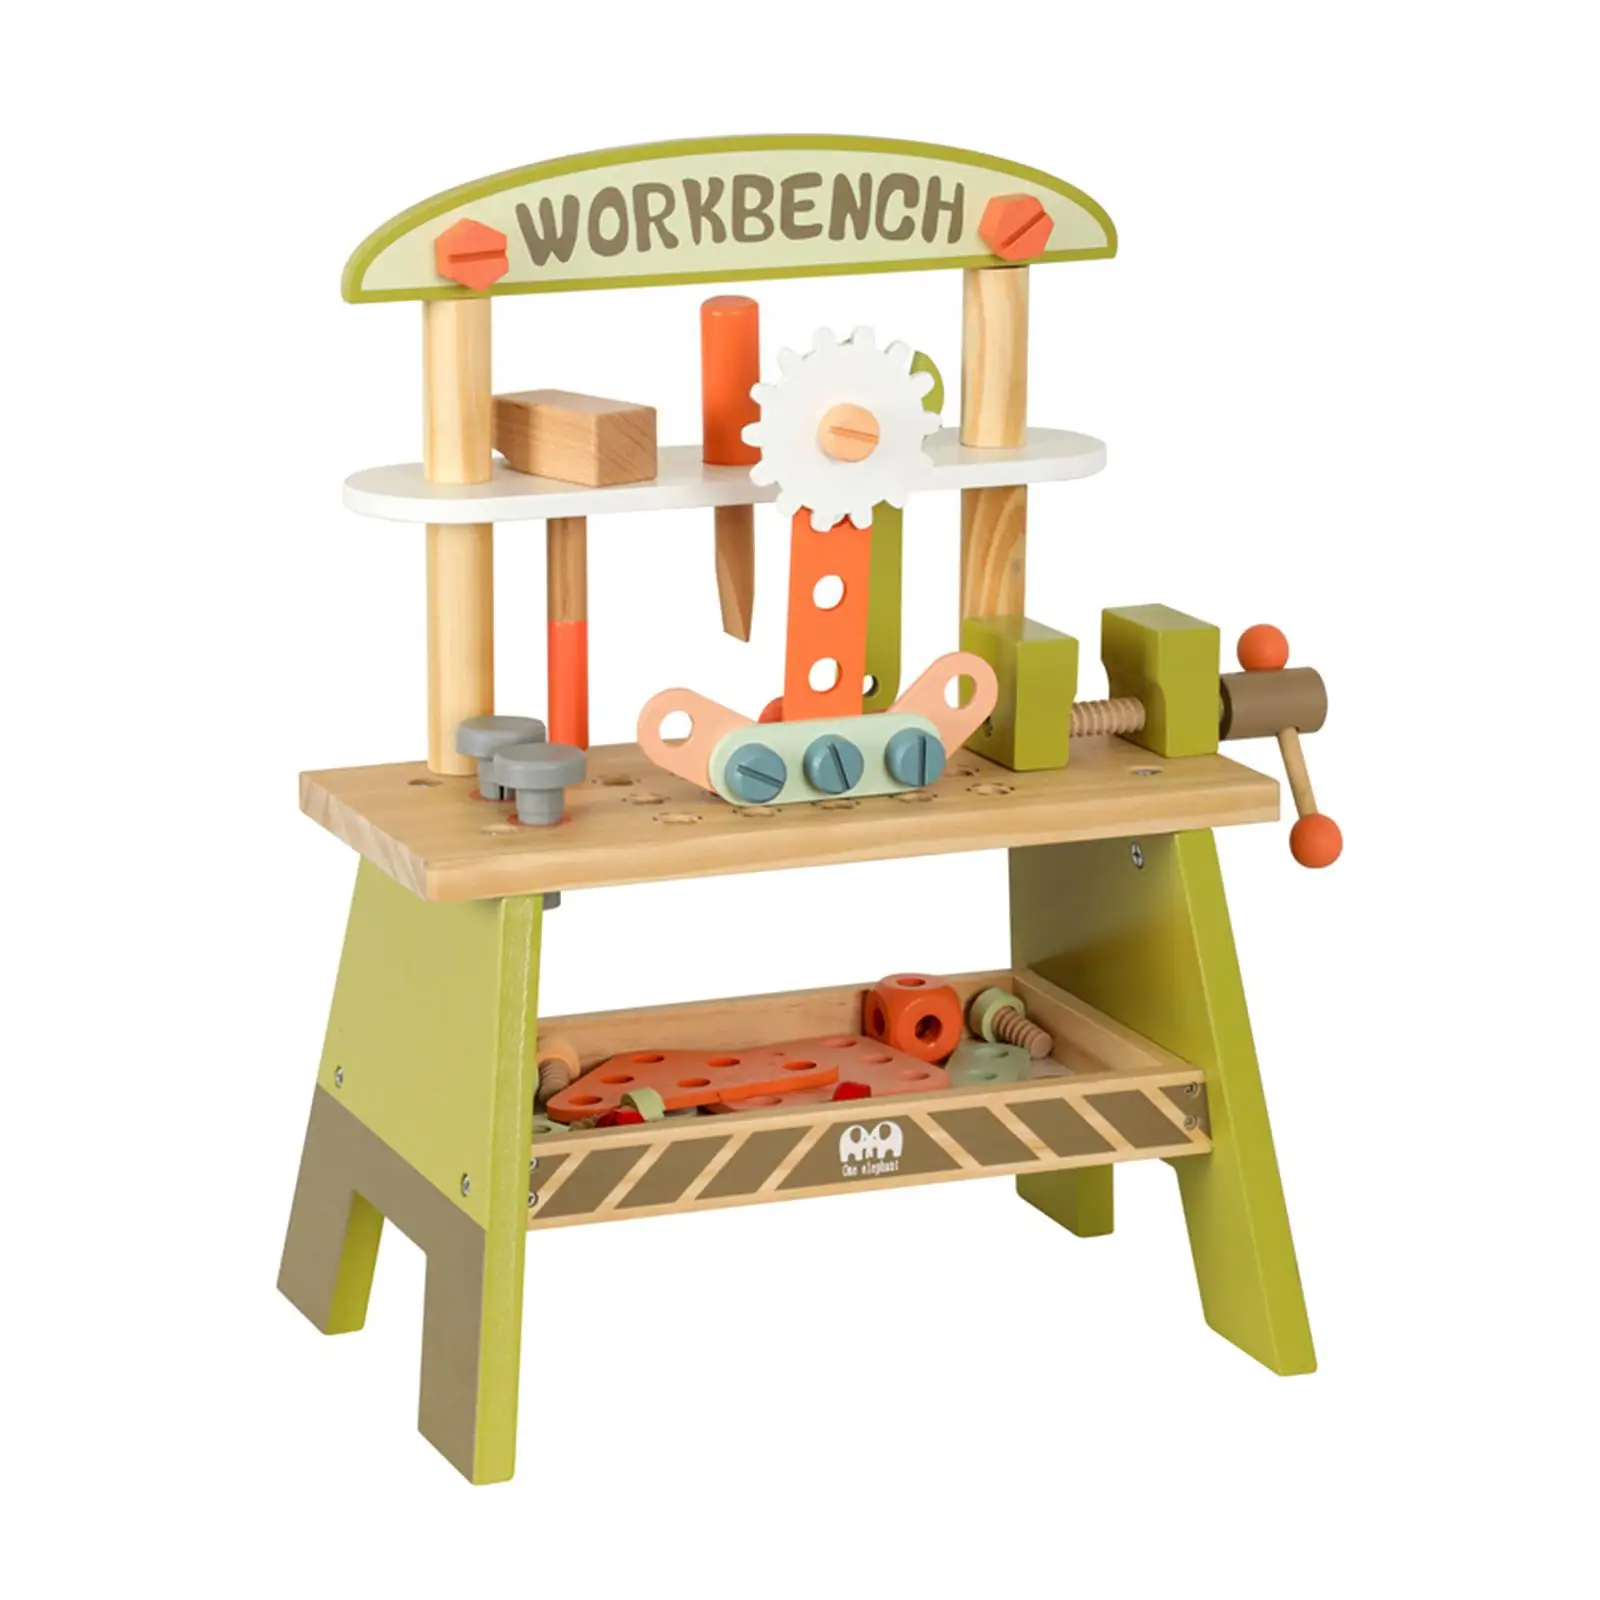 Small Wooden Kid Workbench Toy Simulation Workshop Hand Tool DIY Kid`s Wooden Tool Bench Toy for Ages 3+ Child Holiday Present